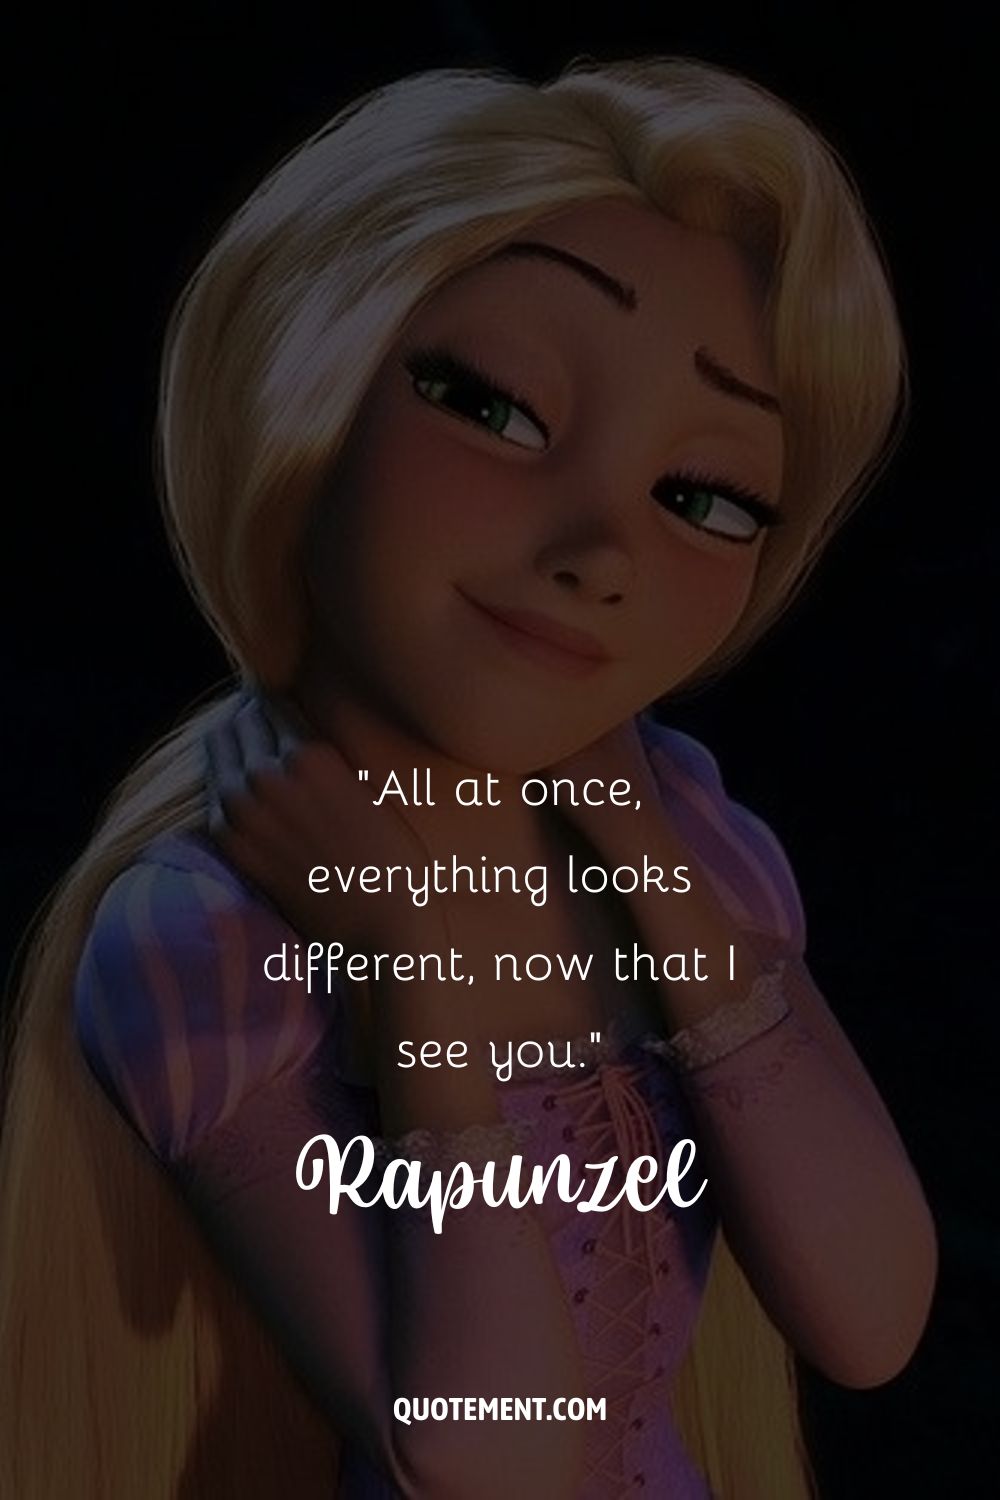 rapuzel in pink dress representing tangled movie quote